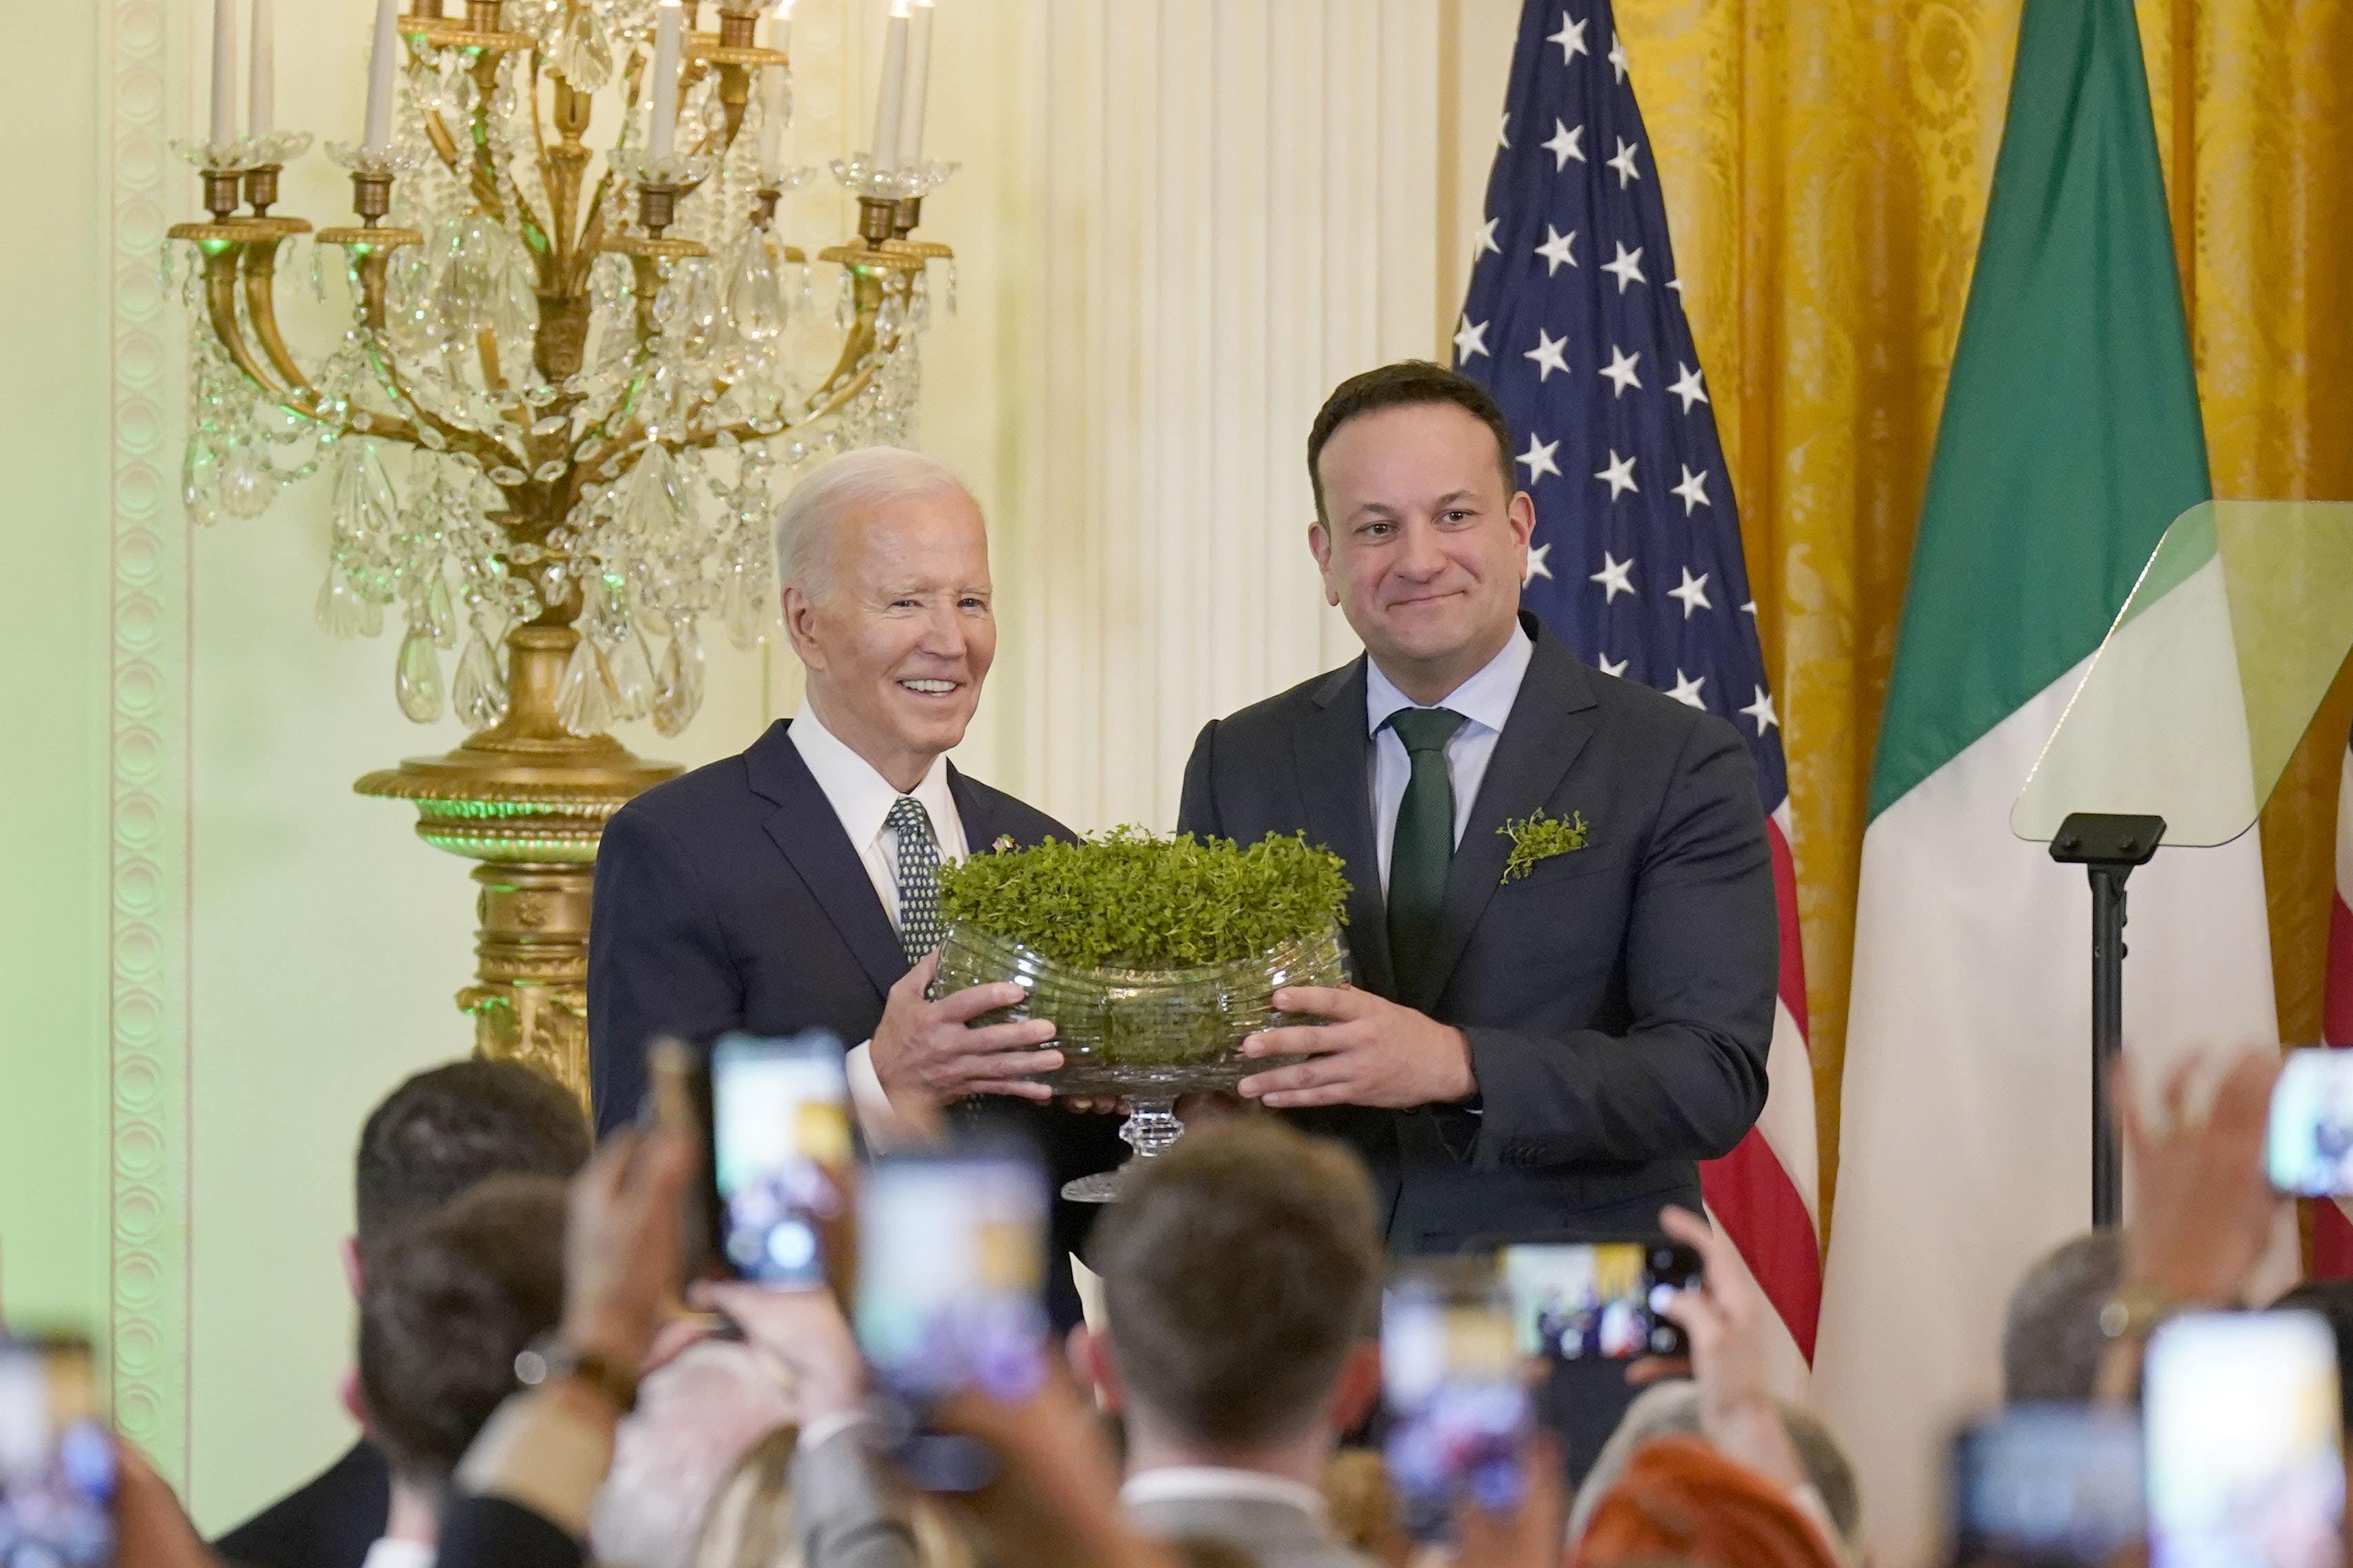 Varadkar and Joe Biden during the St Patrick’s Day reception and shamrock ceremony in the White House